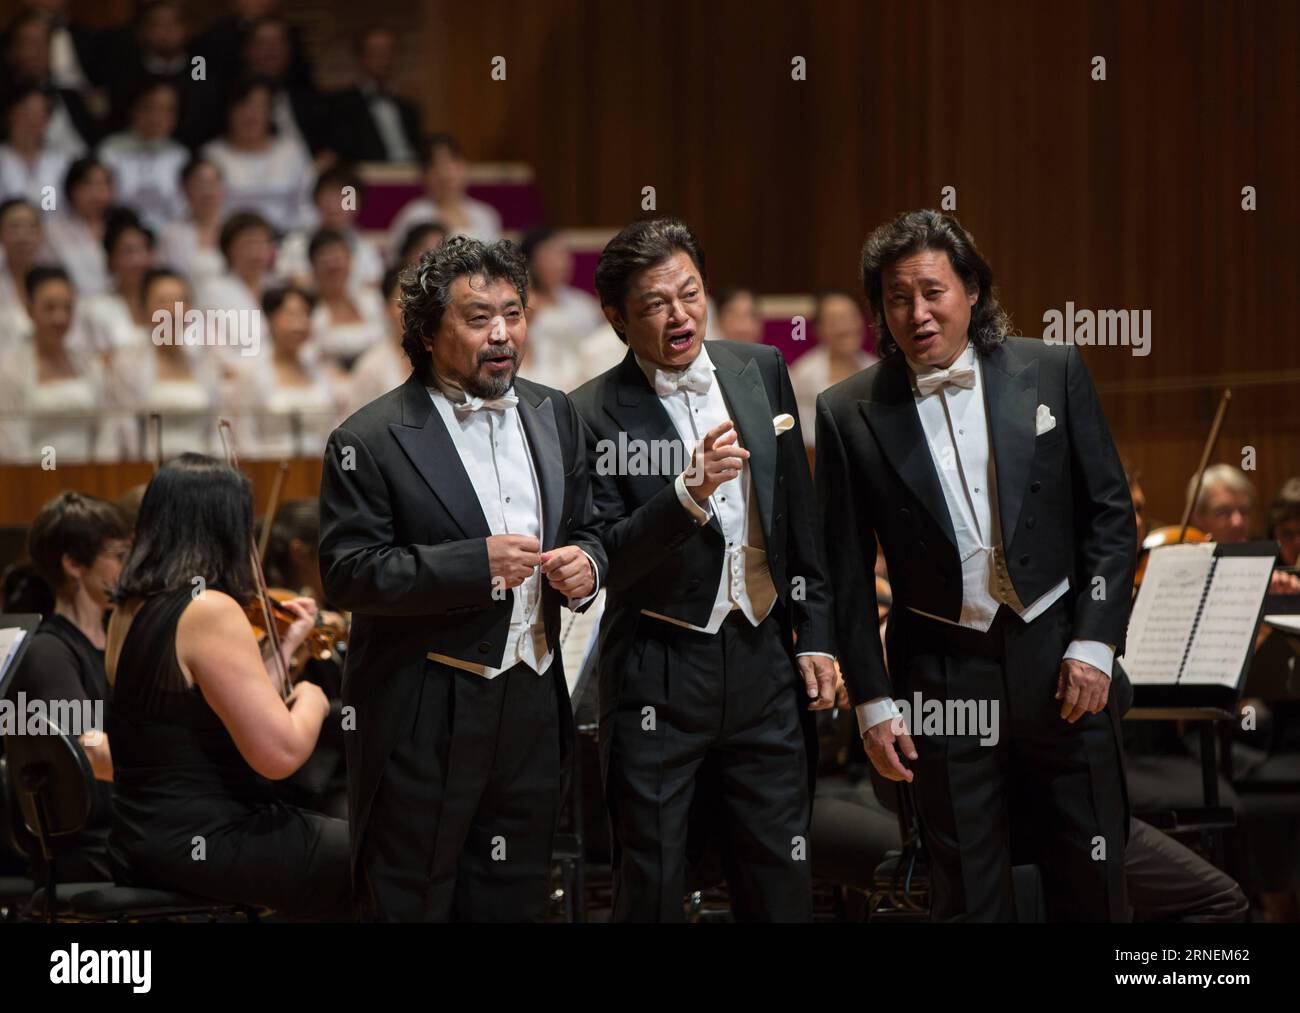 (160627) -- SYDNEY, June 27, 2016 -- Wei Song (L), Mo Hualun (C) and Dai Yuqiang, China s Three Tenors, sing during a tenor concert in the Sydney Opera House in Sydney, Australia, June 27, 2016. ) AUSTRALIA-SYDNEY-TENOR CONCERT ZhuxHongye PUBLICATIONxNOTxINxCHN   160627 Sydney June 27 2016 Wei Song l Mo Hualun C and Dai Yuqiang China S Three Tenors Sing during a Tenor Concert in The Sydney Opera House in Sydney Australia June 27 2016 Australia Sydney Tenor Concert ZhuxHongye PUBLICATIONxNOTxINxCHN Stock Photo